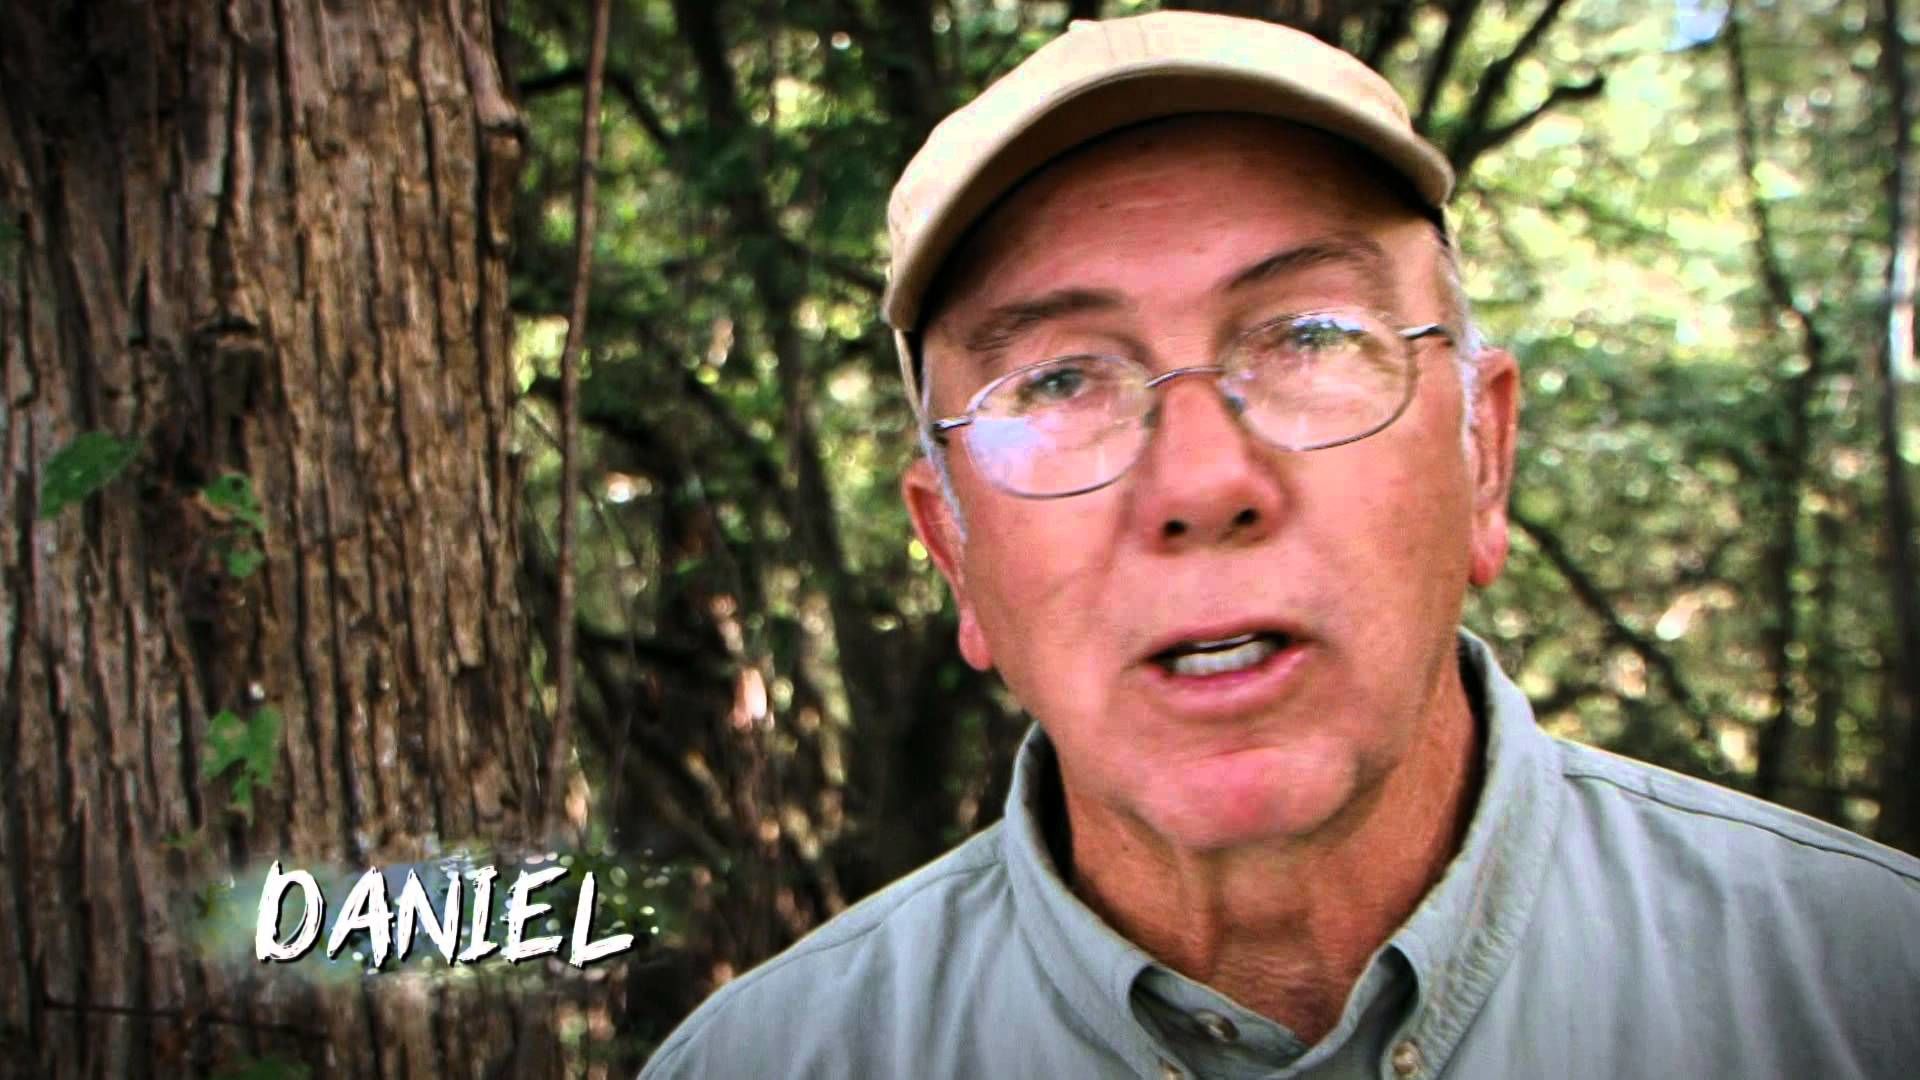 Ronnie on swamp people's net worth